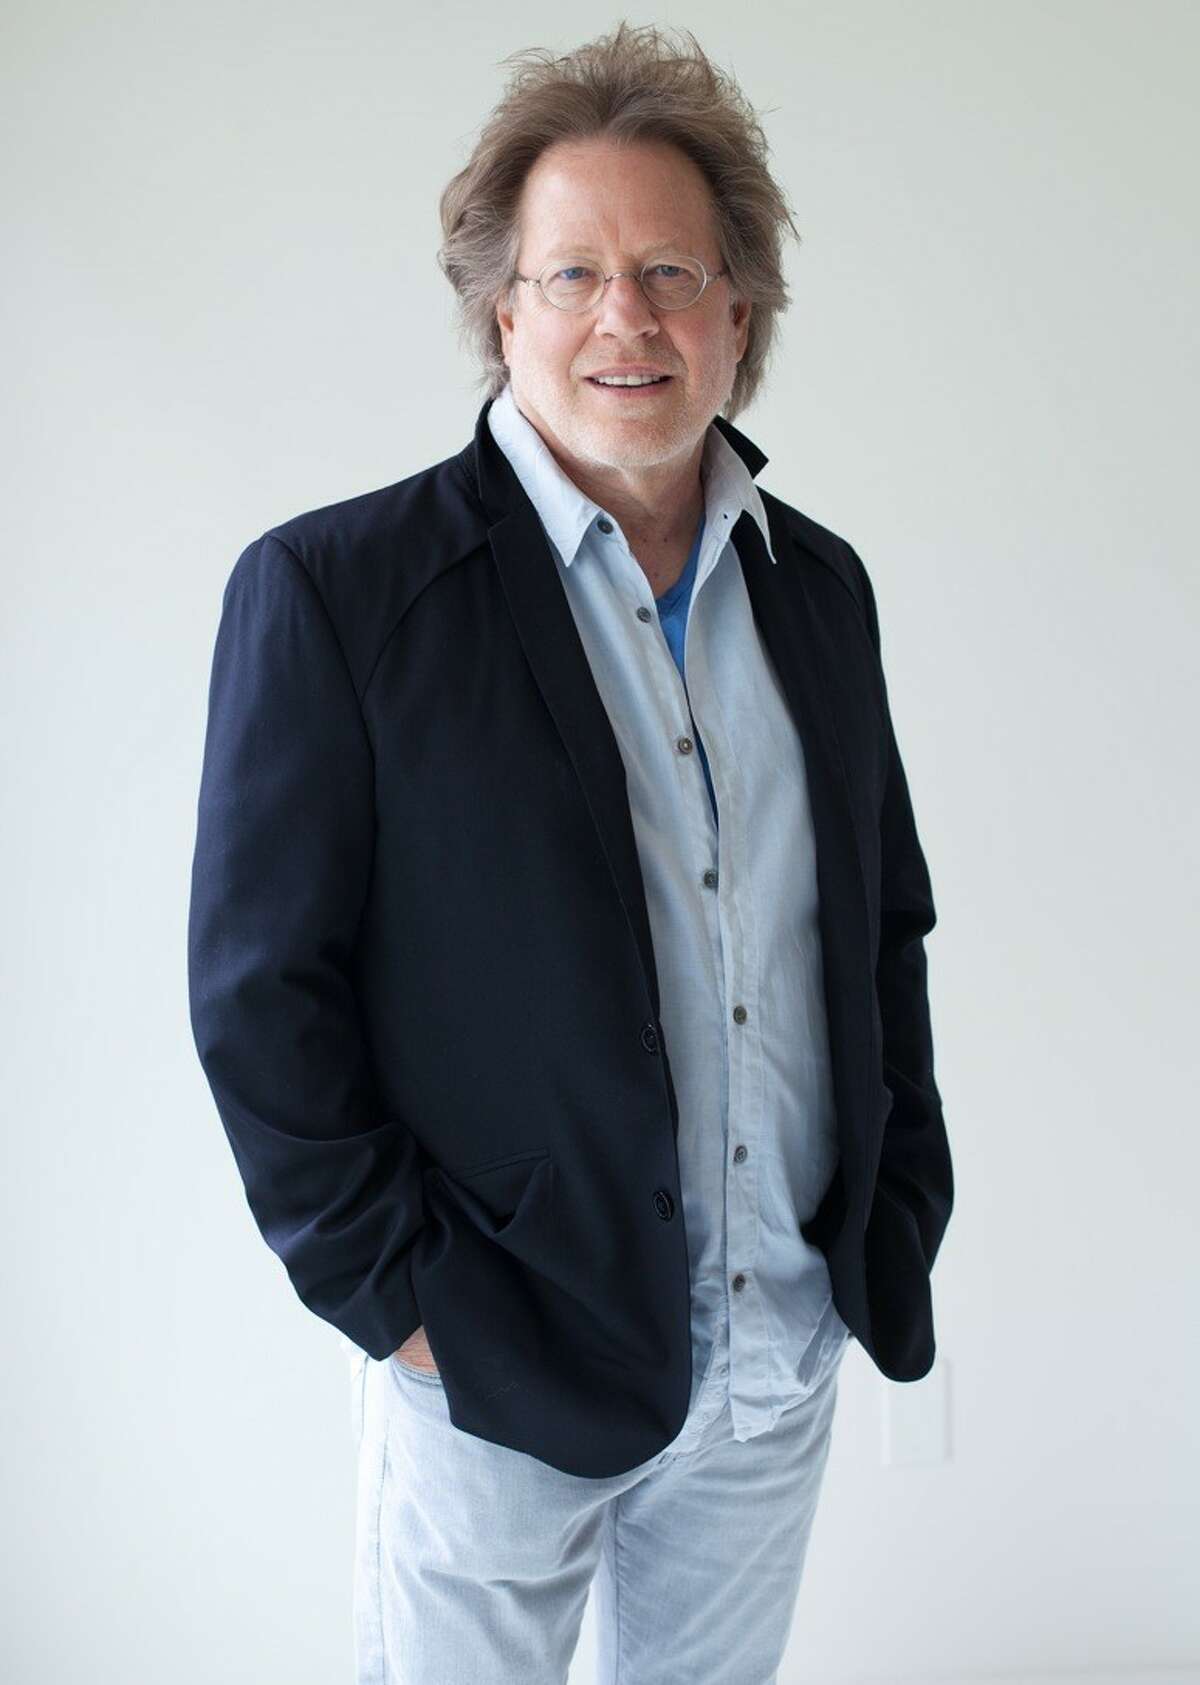 Composer Steve Dorff will be at the Danbury Palace on Saturday, Oct. 1, to perform many of his popular songs. Some of the artists who have recorded his songs include Barbra Streisand, Kenny Rogers, Celine Dion, Smokey Robinson and Willie Nelson.